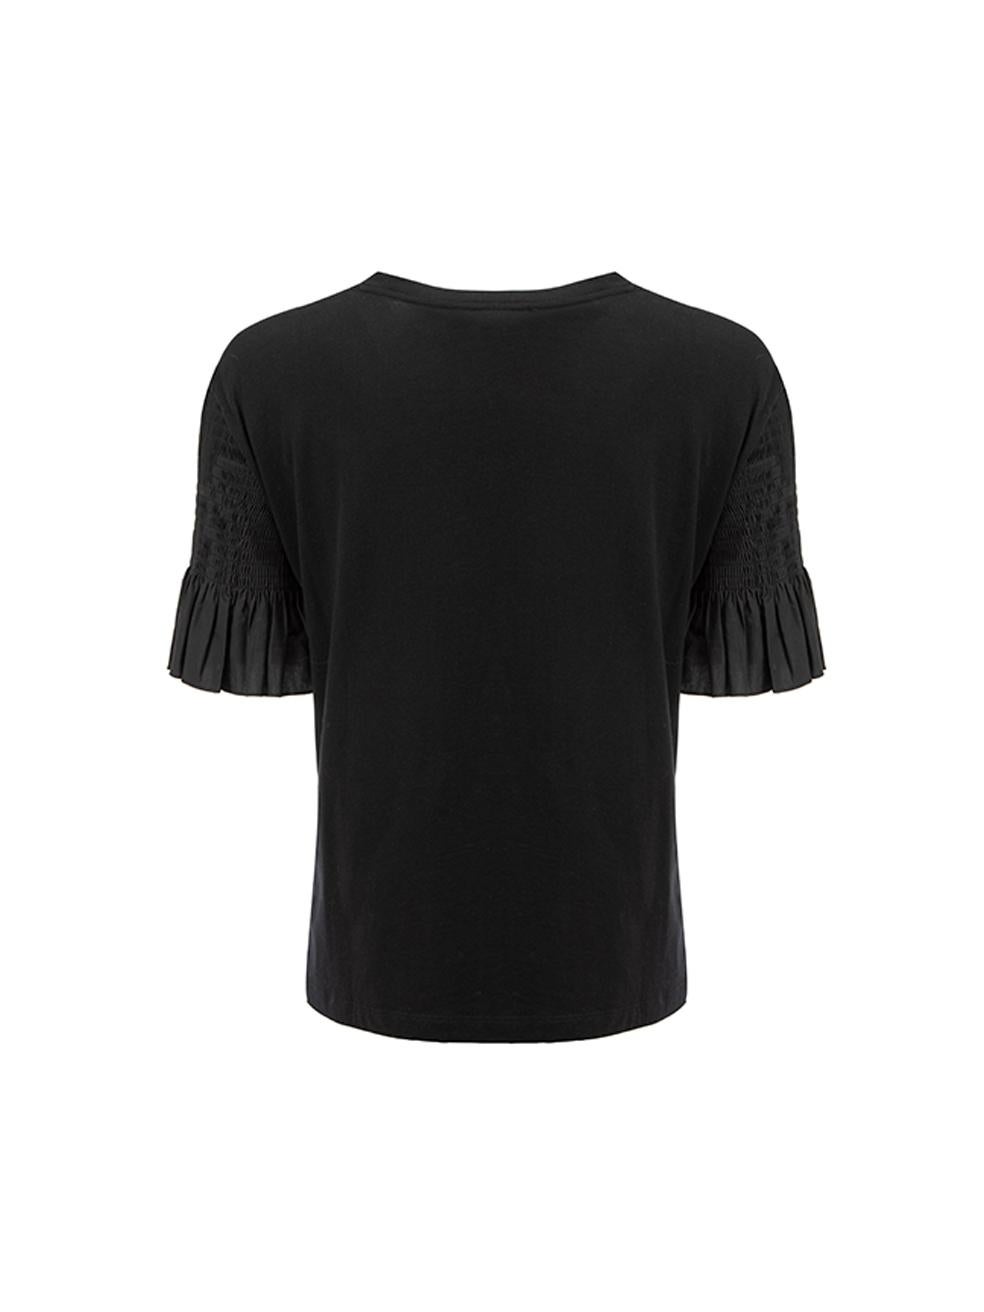 Maje Women's Black Loose Fit Shirring Detail T-shirt In Good Condition For Sale In London, GB